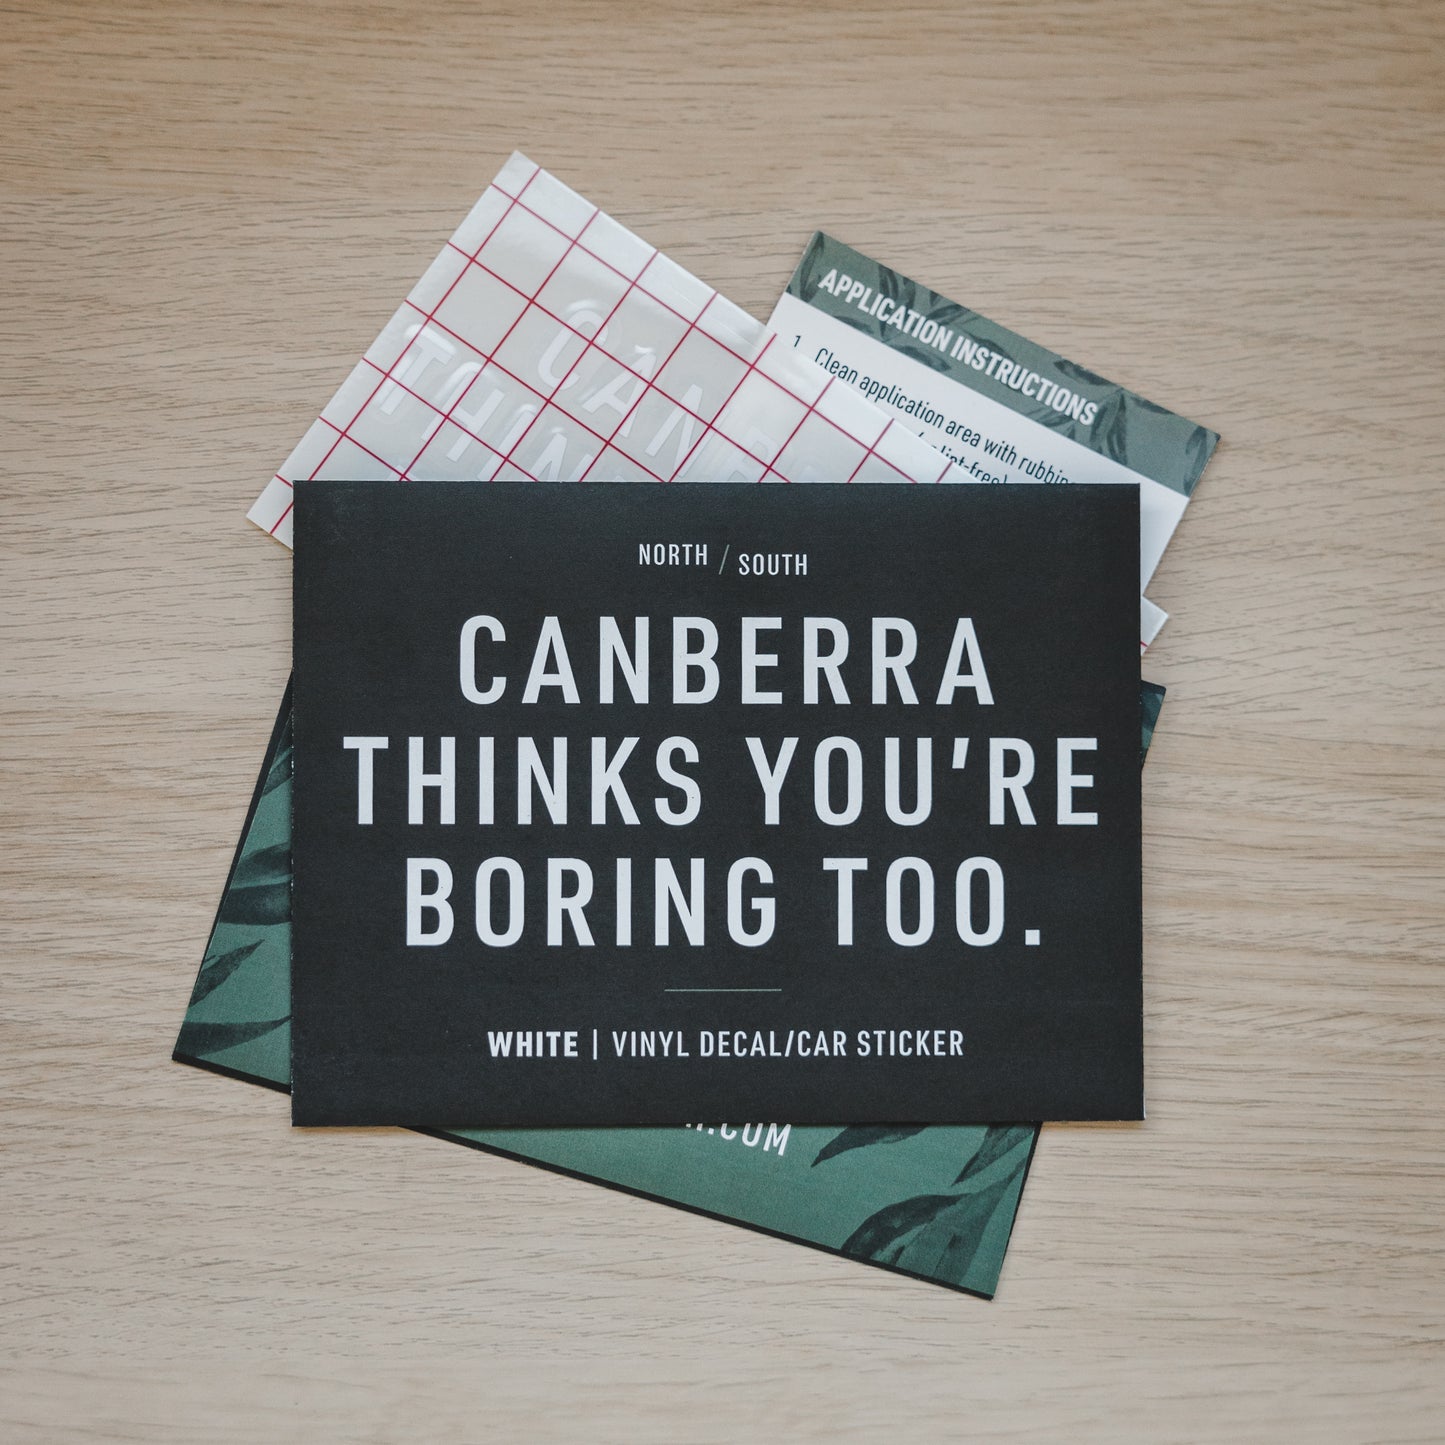 Canberra Thinks You're Boring Too Decal/Car Sticker